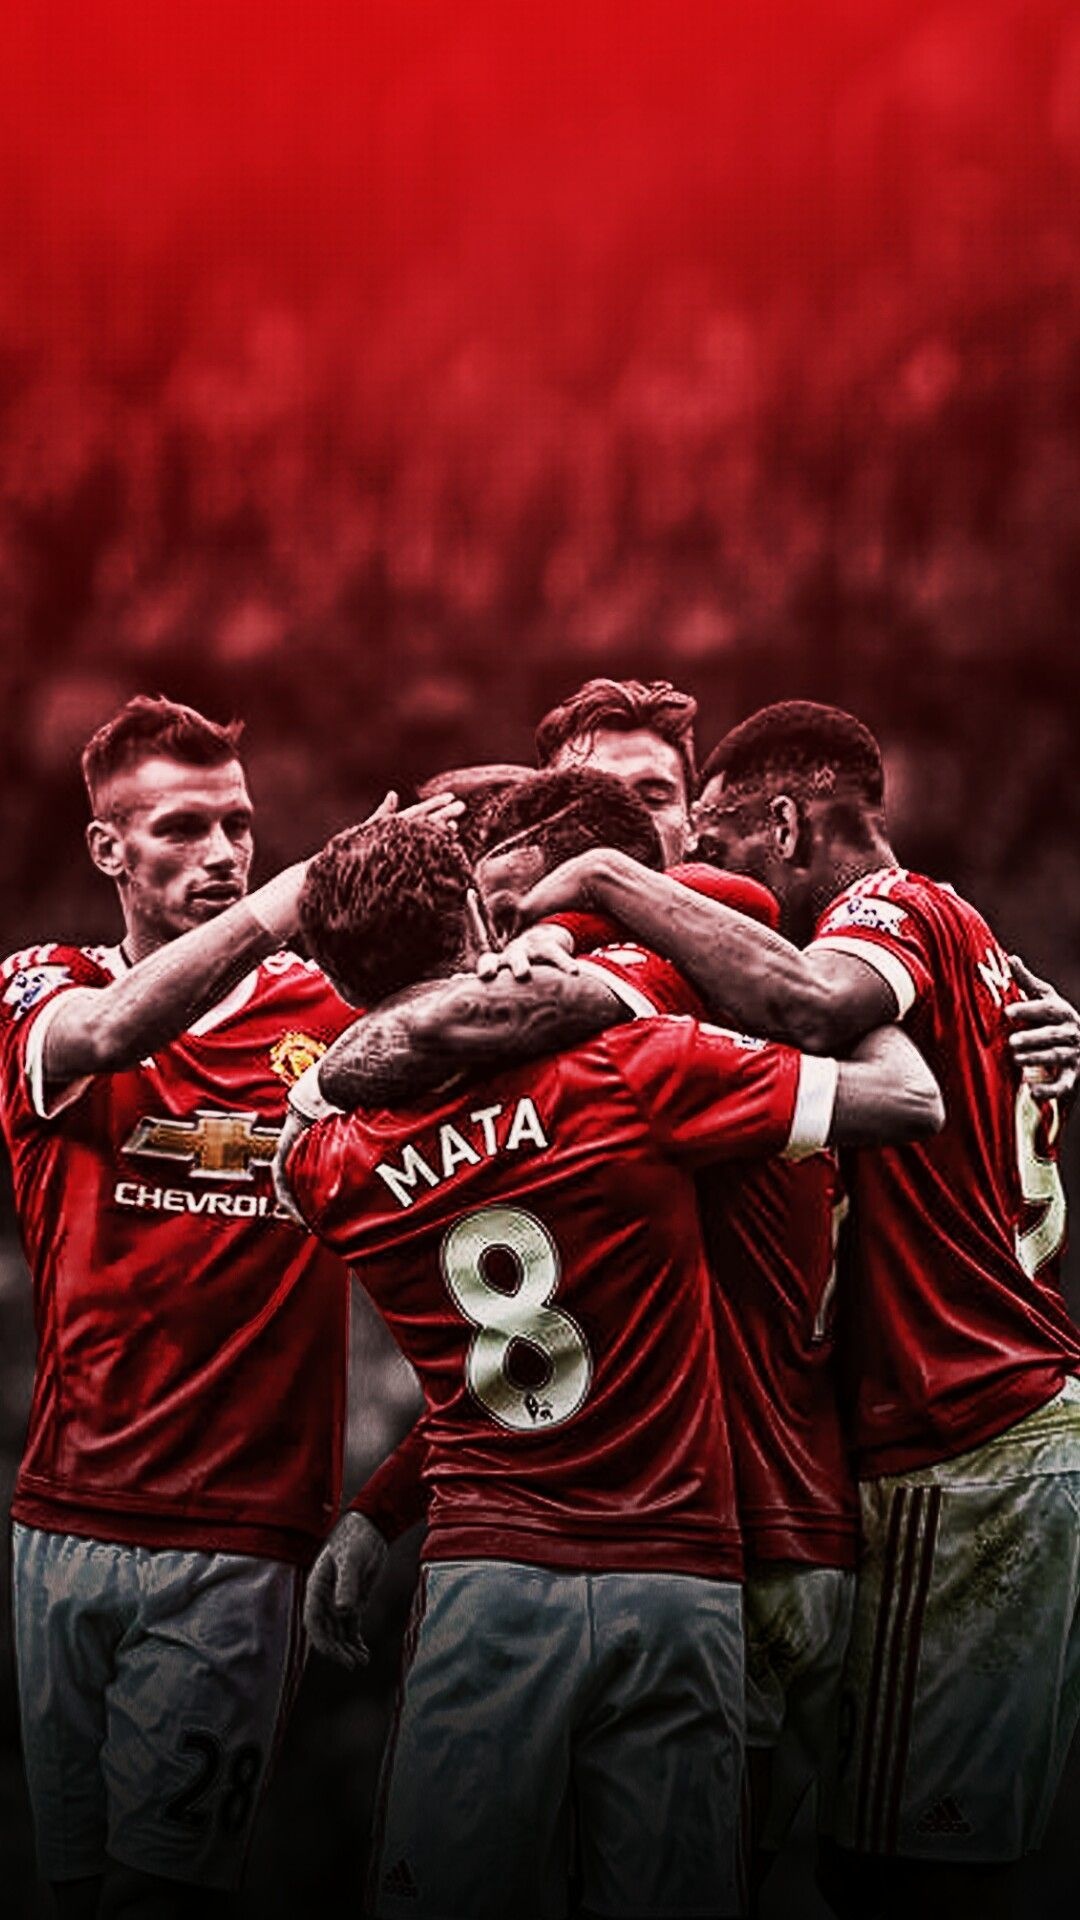 Manchester United, Football legends, Team tradition, Glory on field, 1080x1920 Full HD Phone